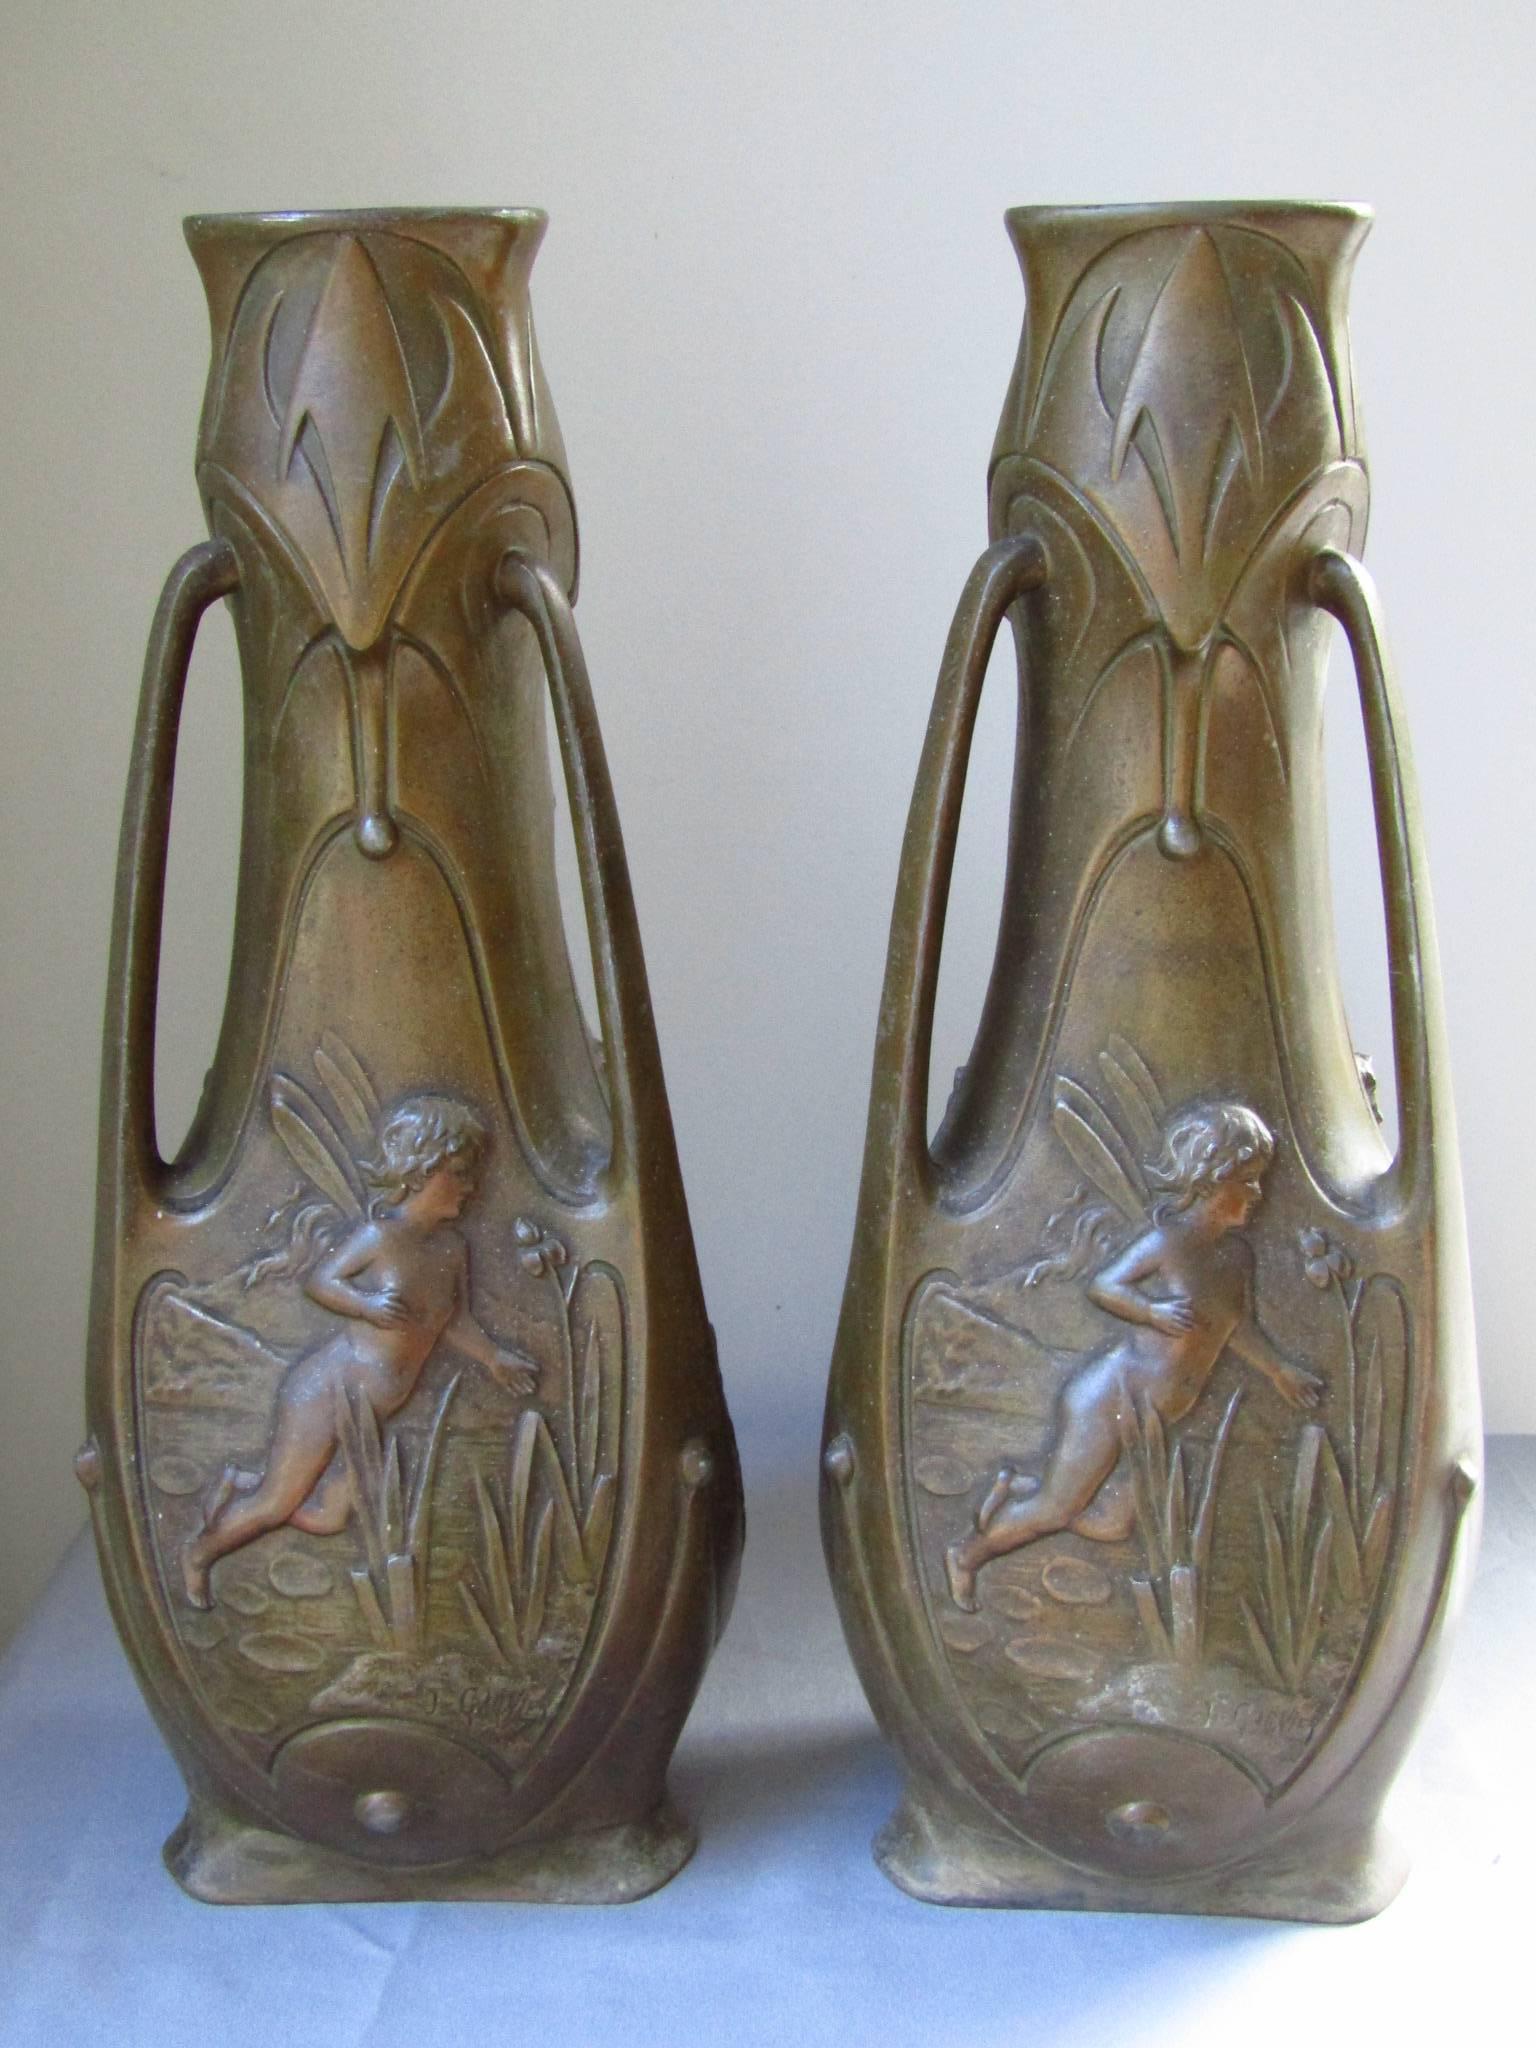 French Pair of Art Nouveau Bronze Patinated Vases by J. Garnier, France, 1900